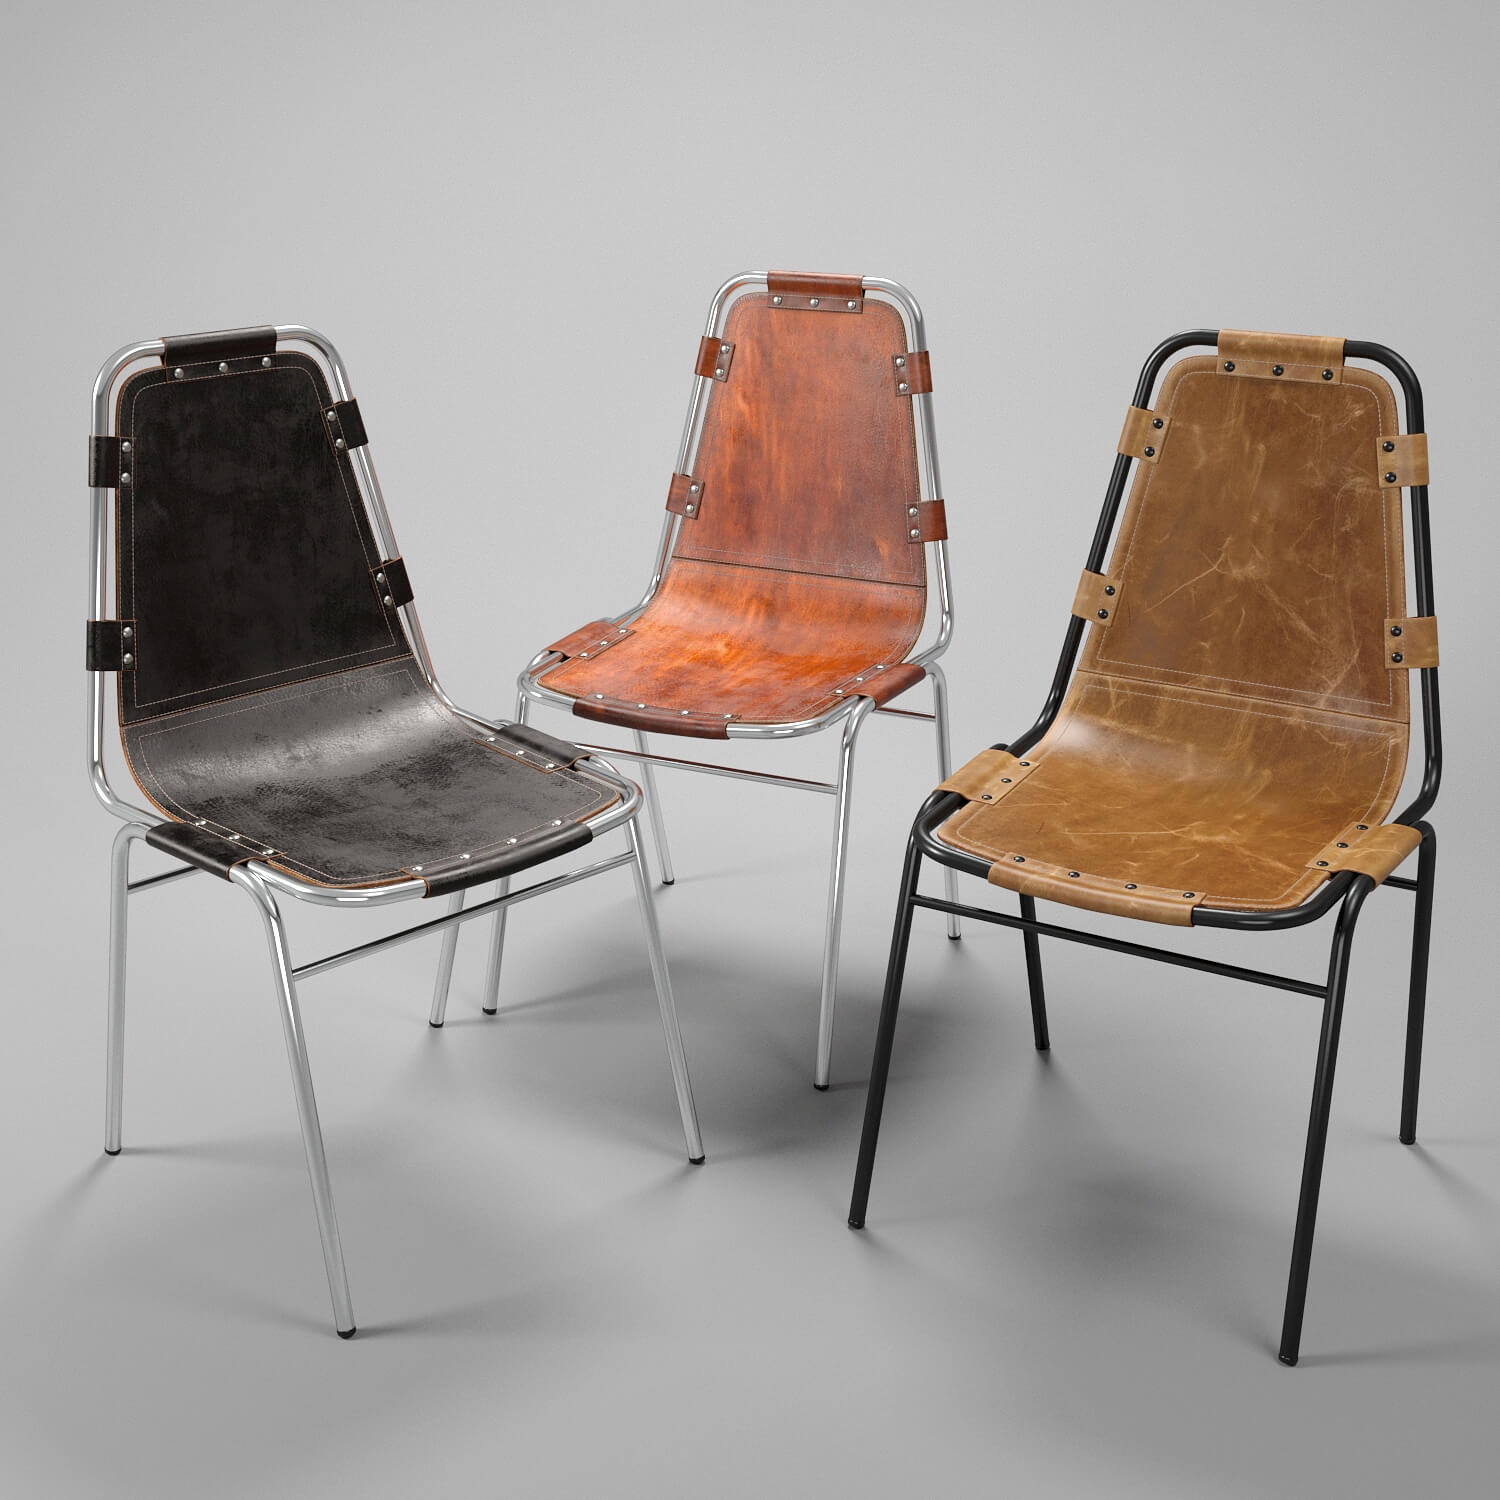 Les Arcs chair by Charlotte Perriand - download 3d model | ZeelProject.com